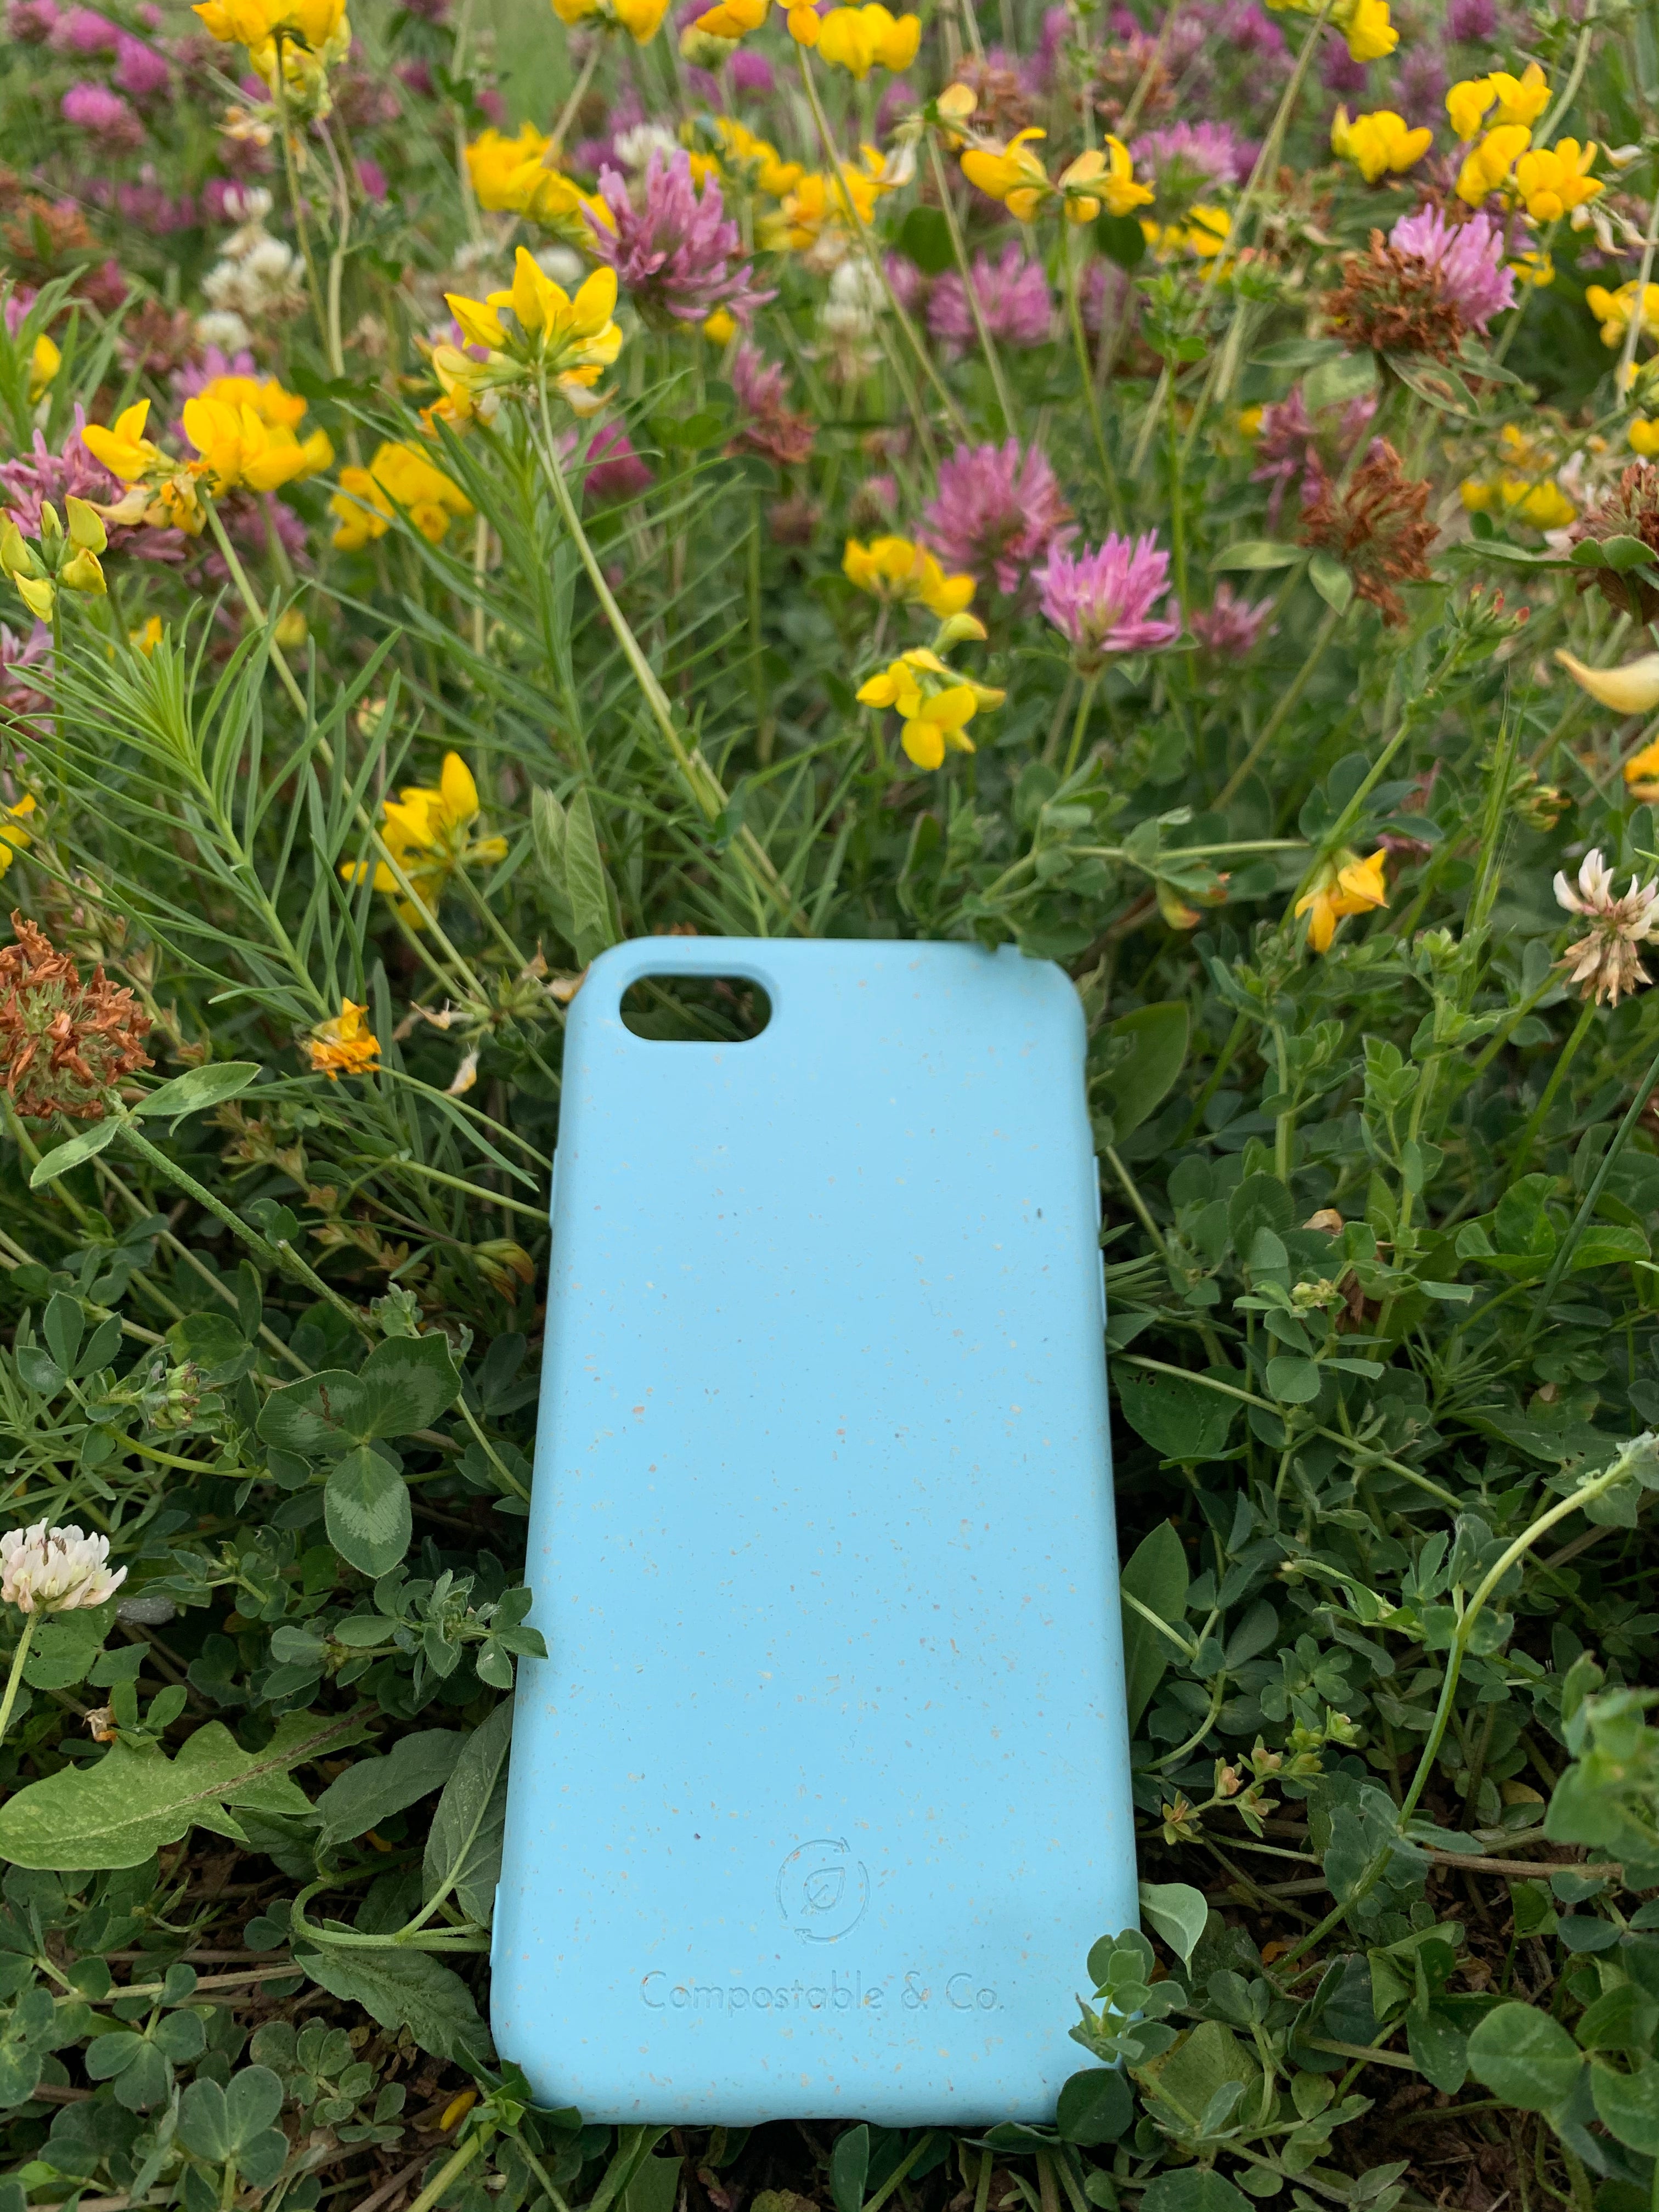 Compostable & Co. iPhone 7 / 8 / SE 2020 blue biodegradable phone case in natural background